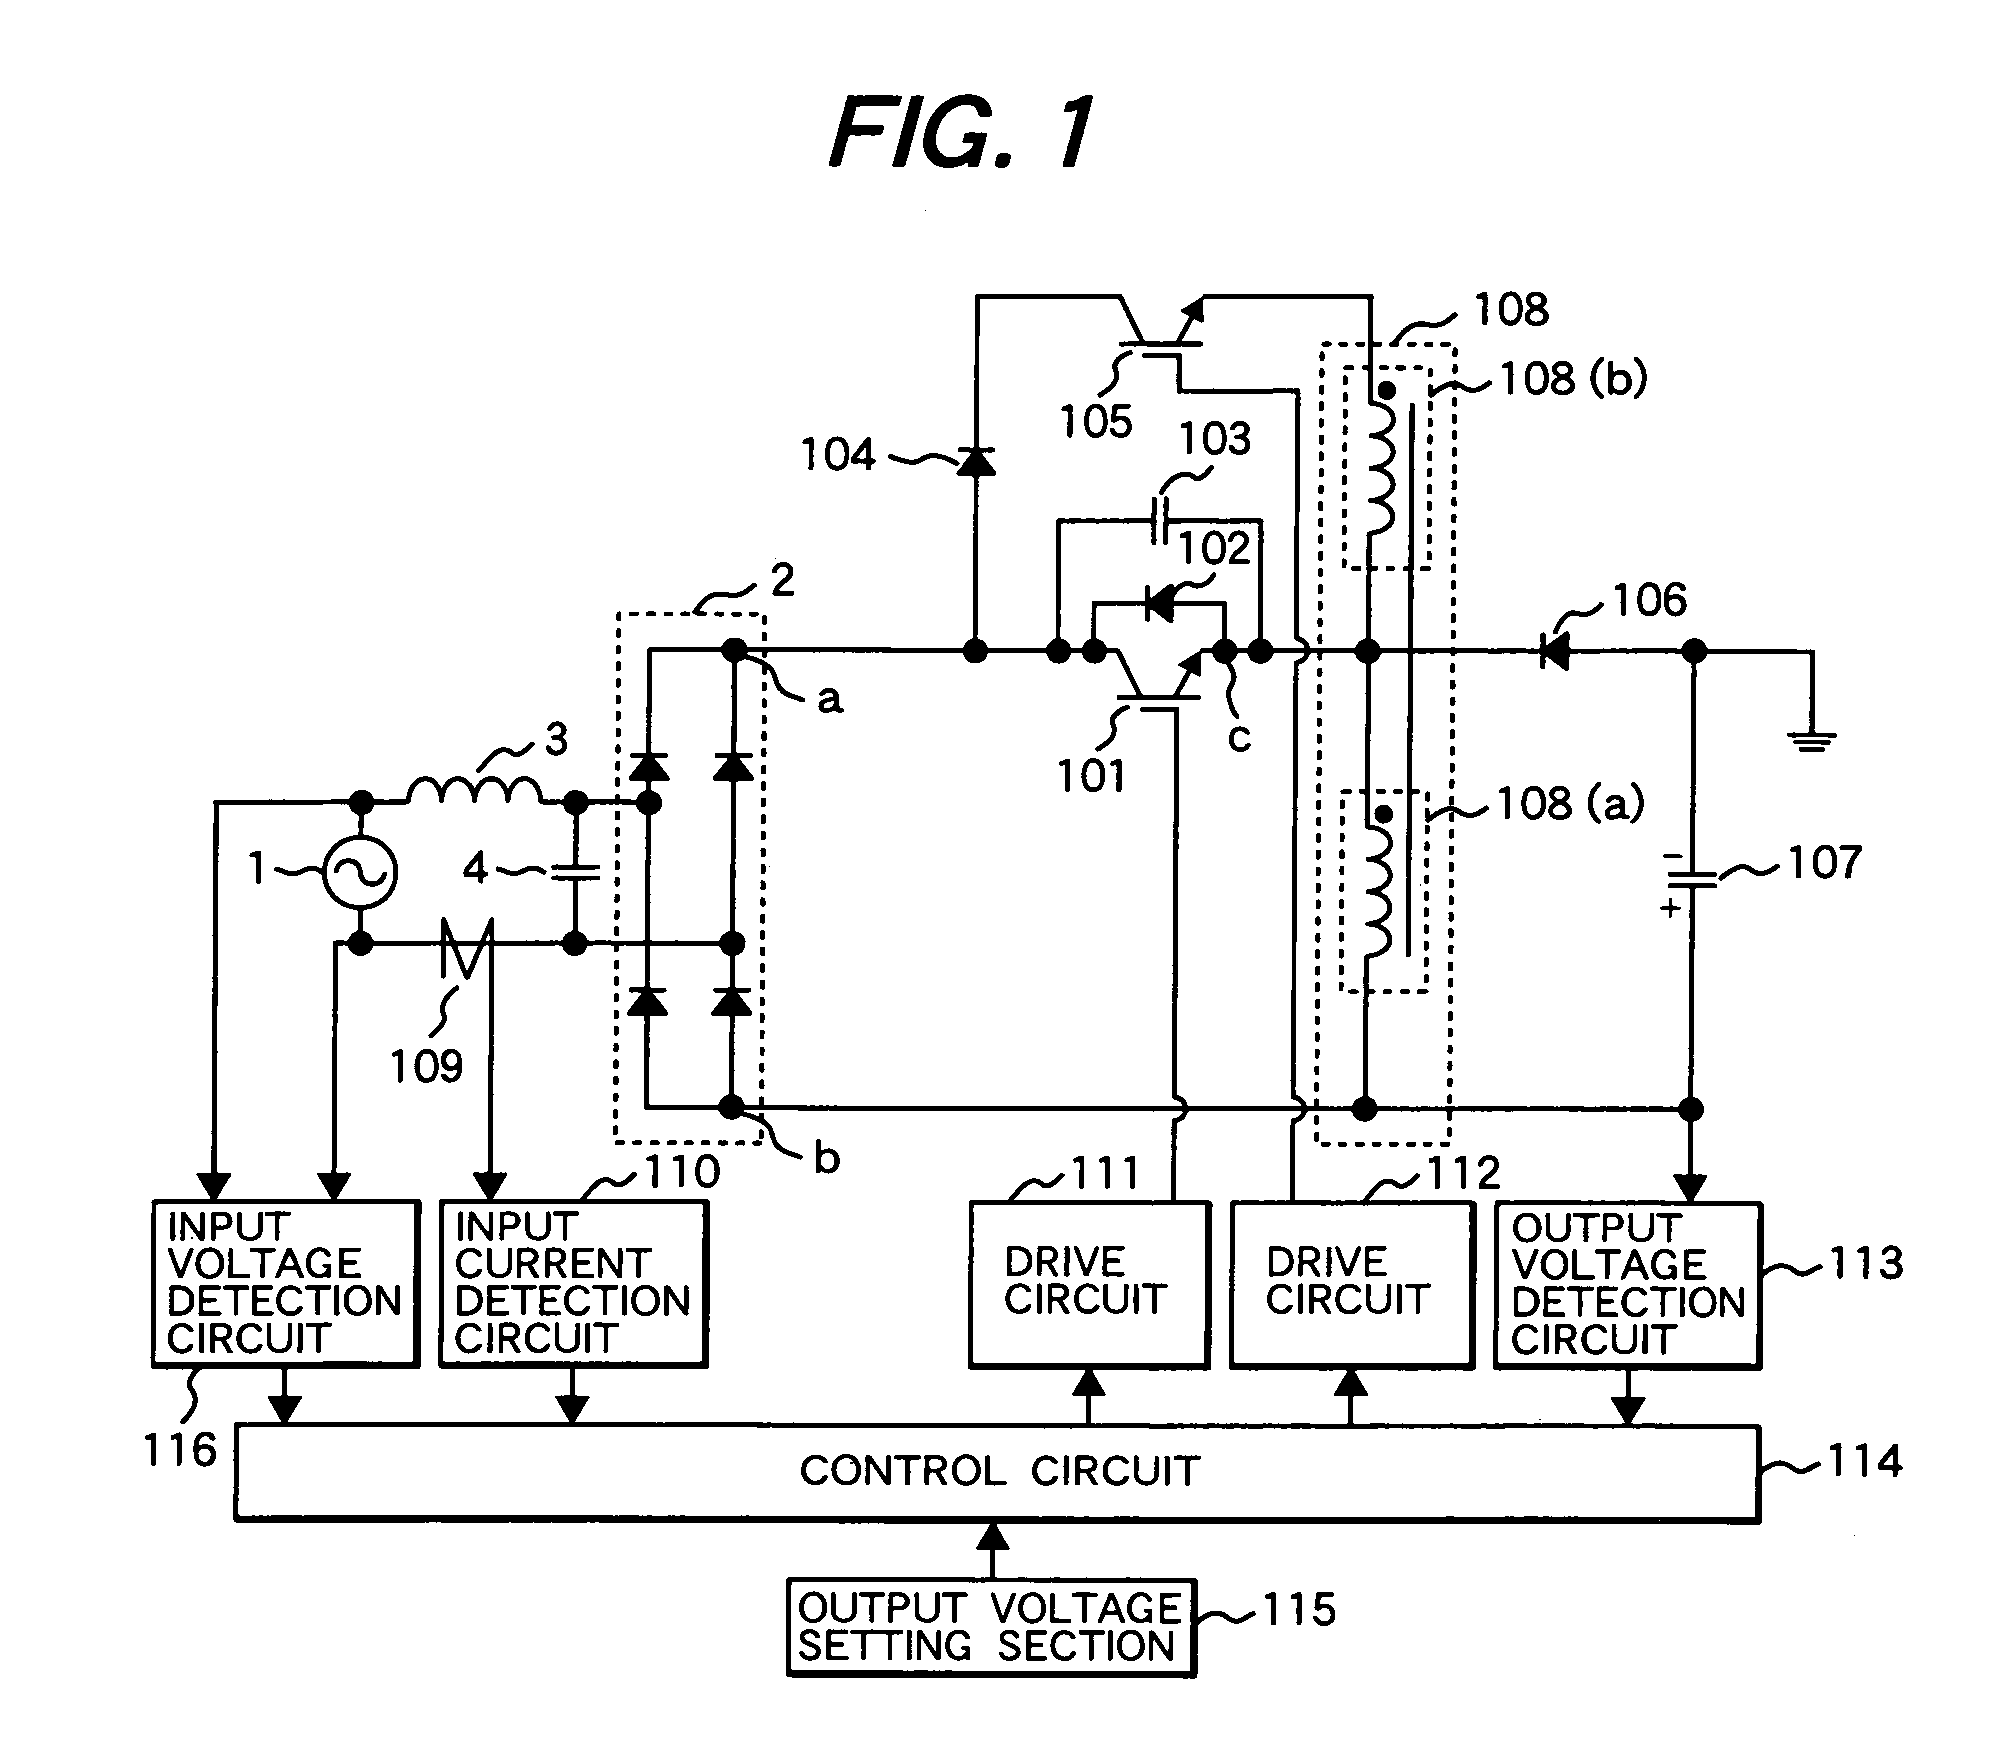 Soft switching DC-DC converter including a buck converter and a boost converter sharing a common transformer